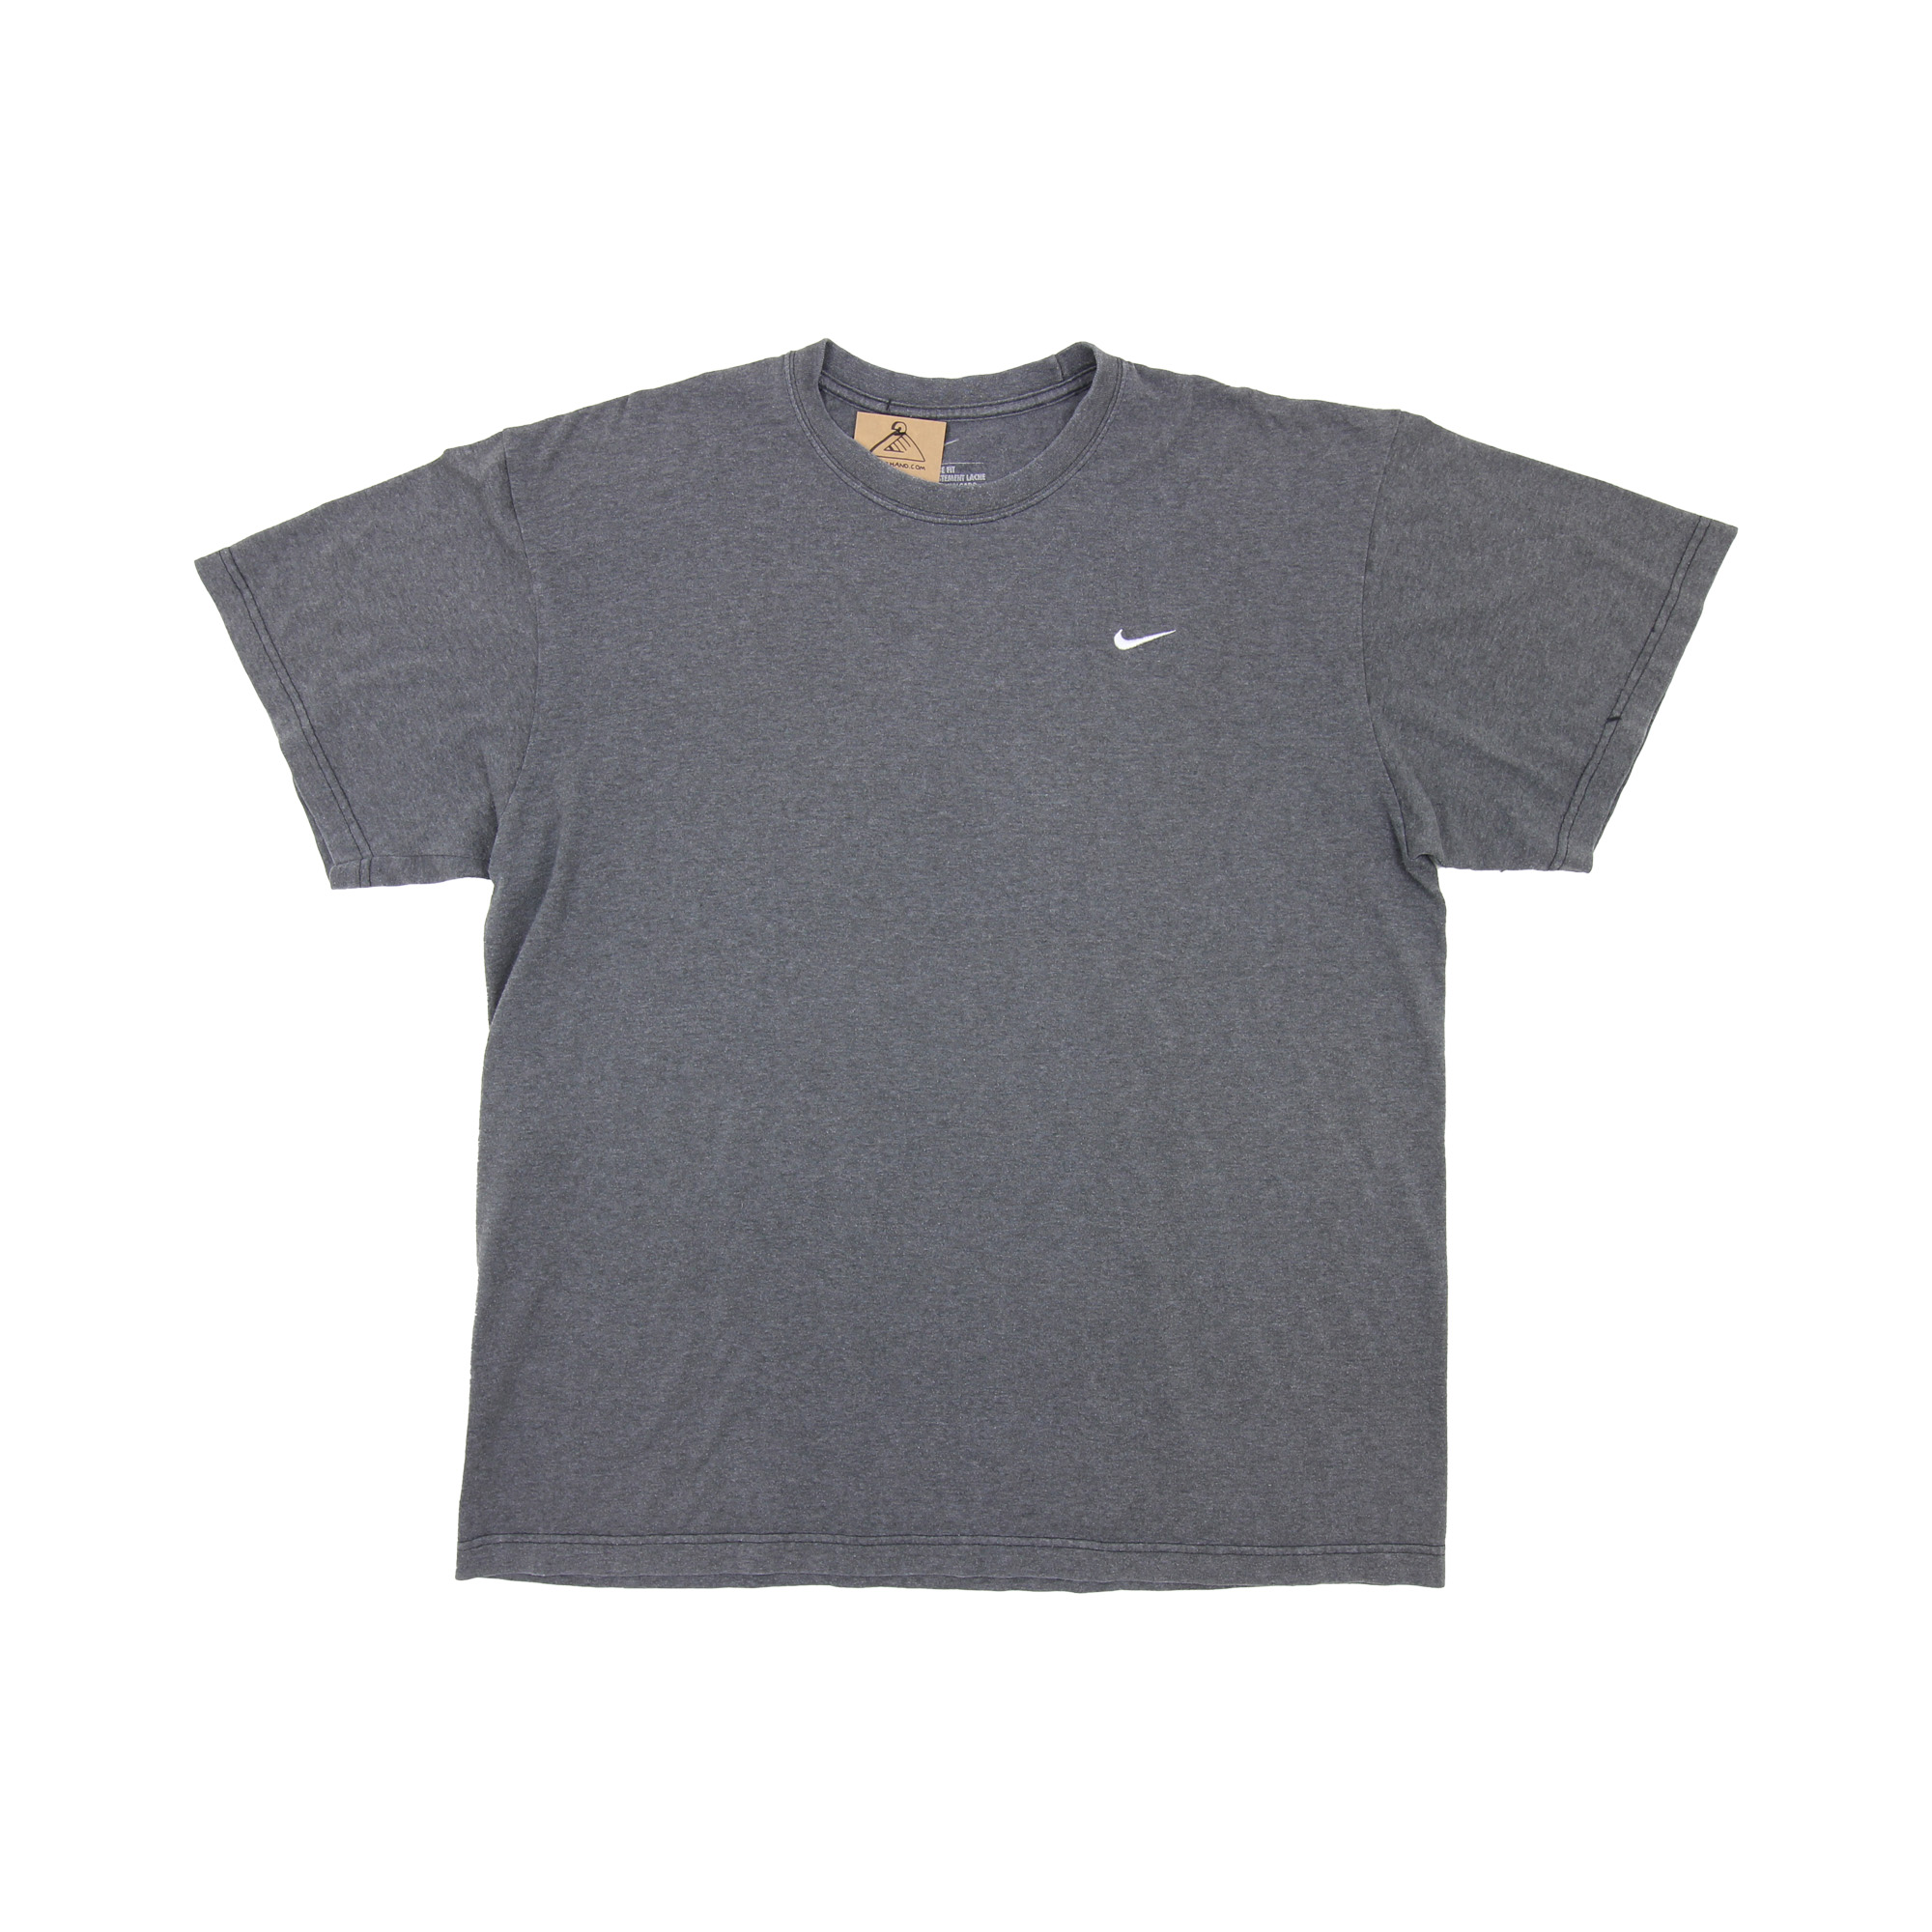 Nike Embroidered Logo T-Shirt -  XL